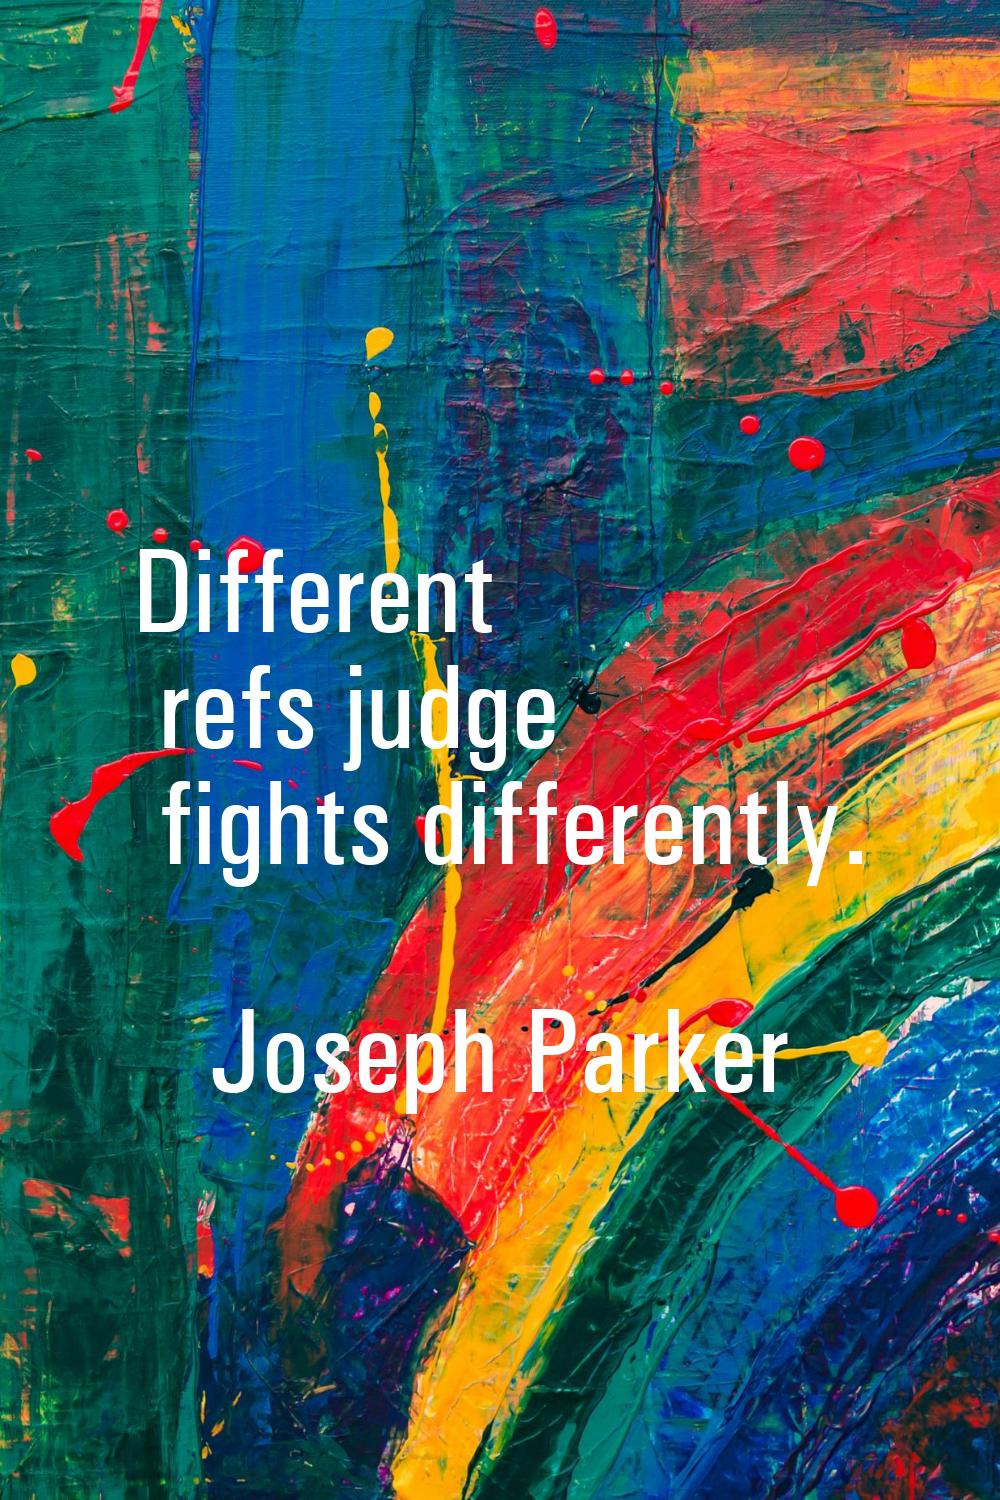 Different refs judge fights differently.